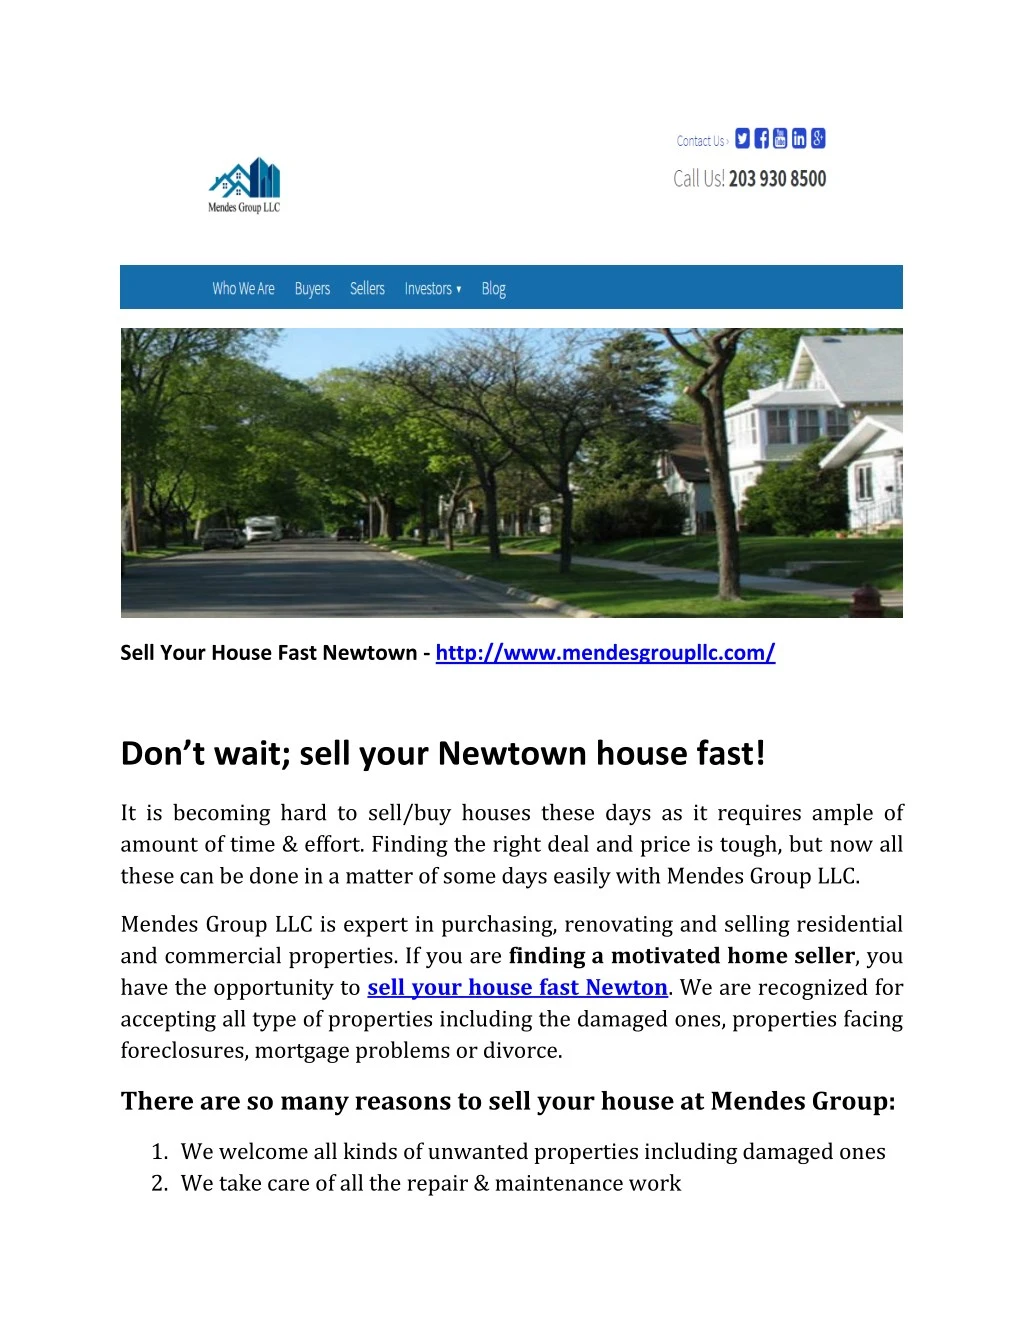 sell your house fast newtown http